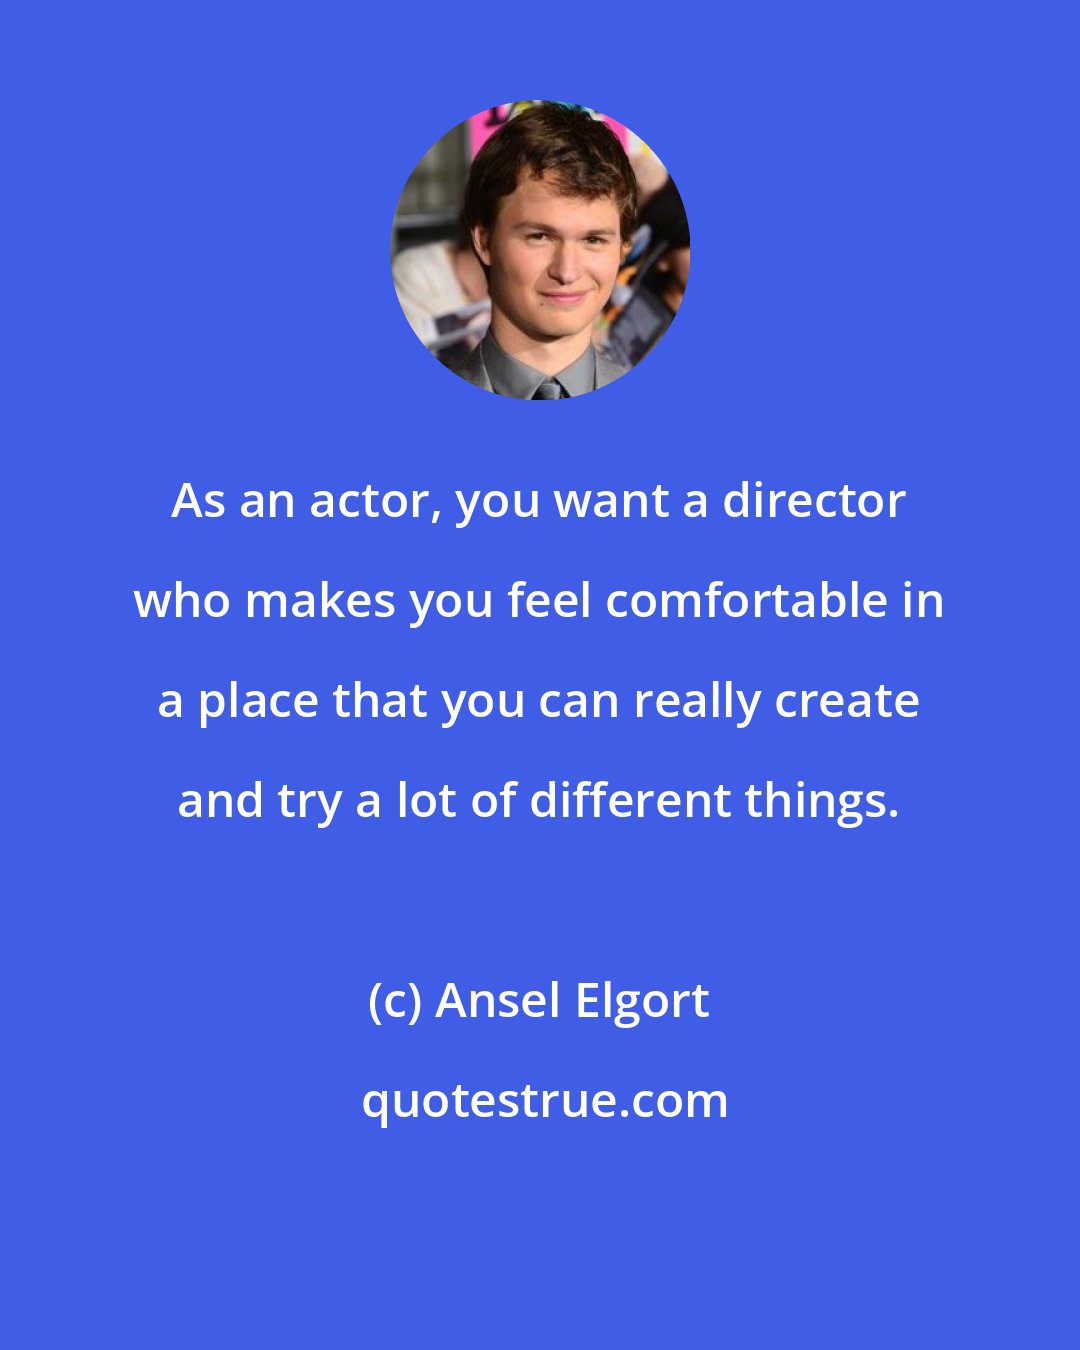 Ansel Elgort: As an actor, you want a director who makes you feel comfortable in a place that you can really create and try a lot of different things.